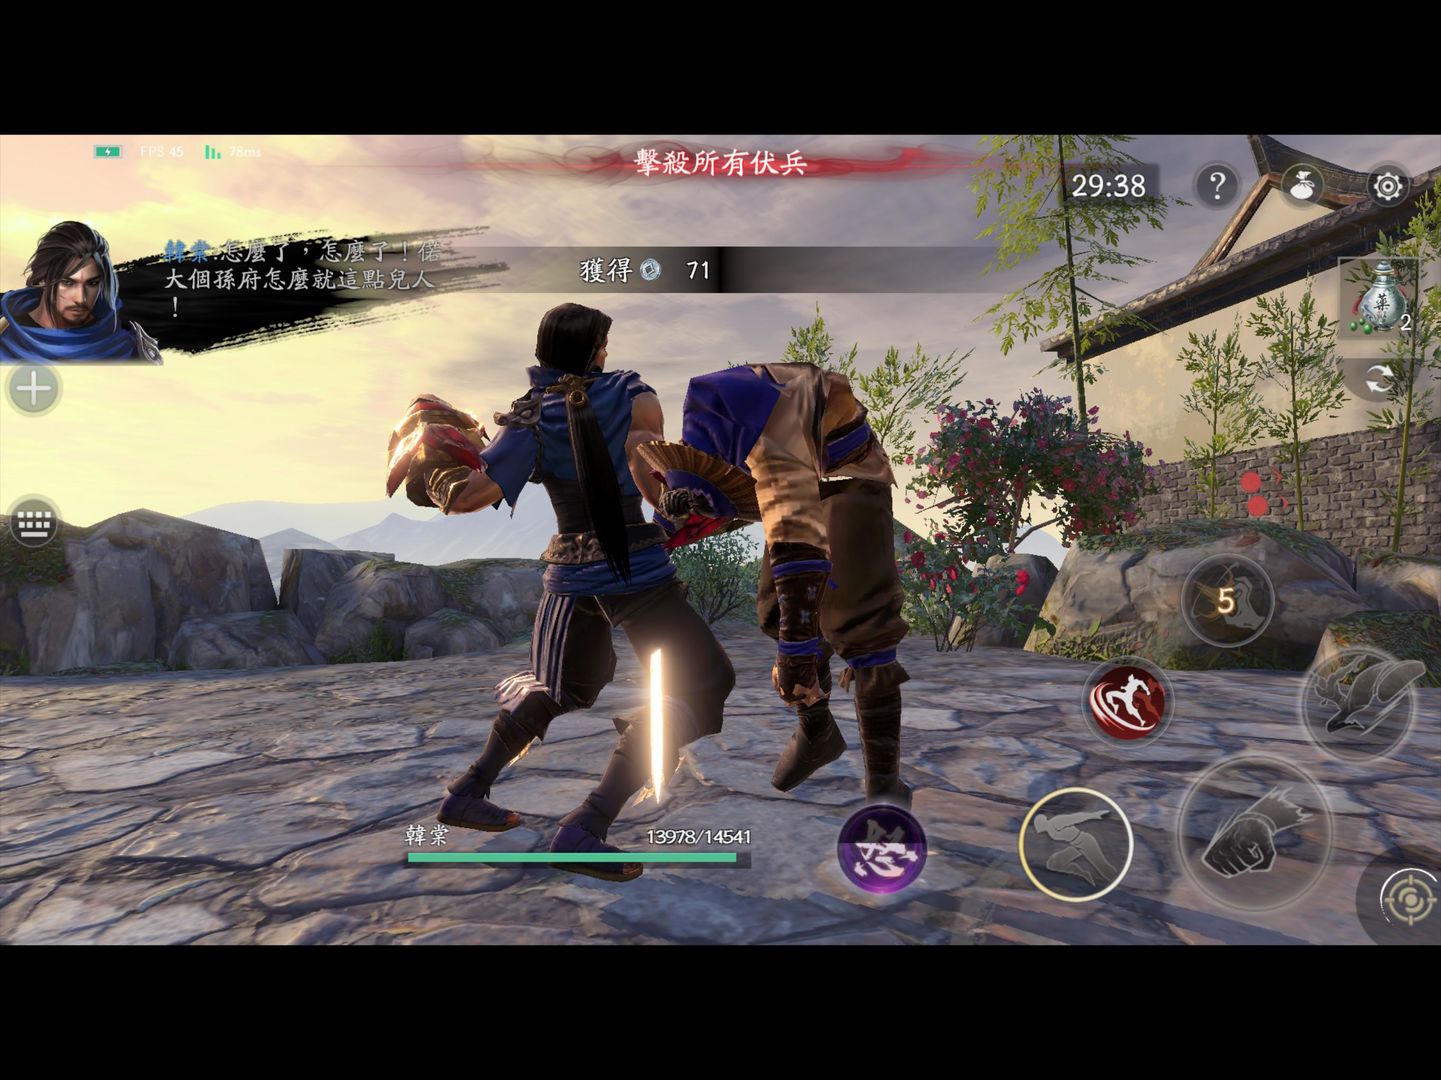 Screenshot of Meteor, Butterfly And a Sword